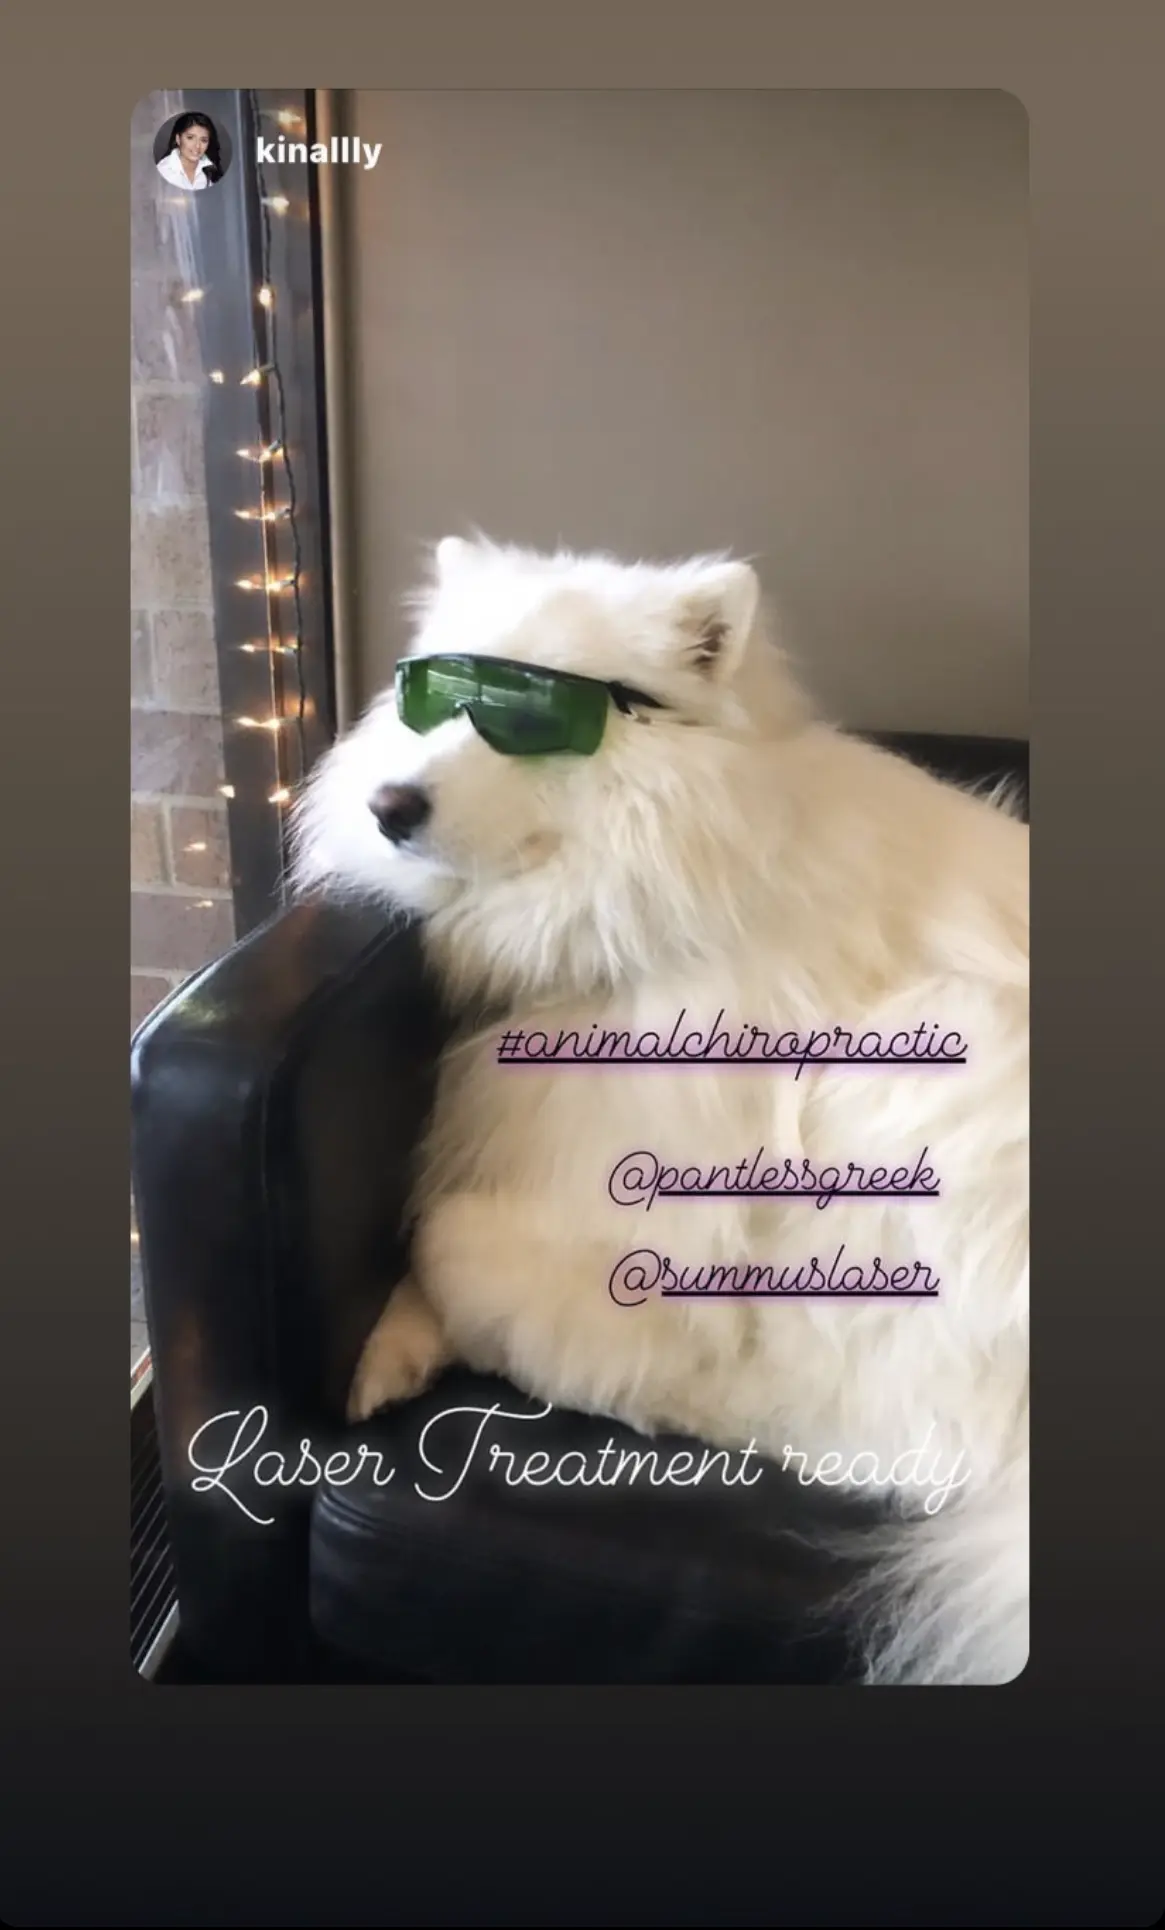 @summuslaser; instagram story; dog lounging on the couch in protective goggles about to receive laser treatment